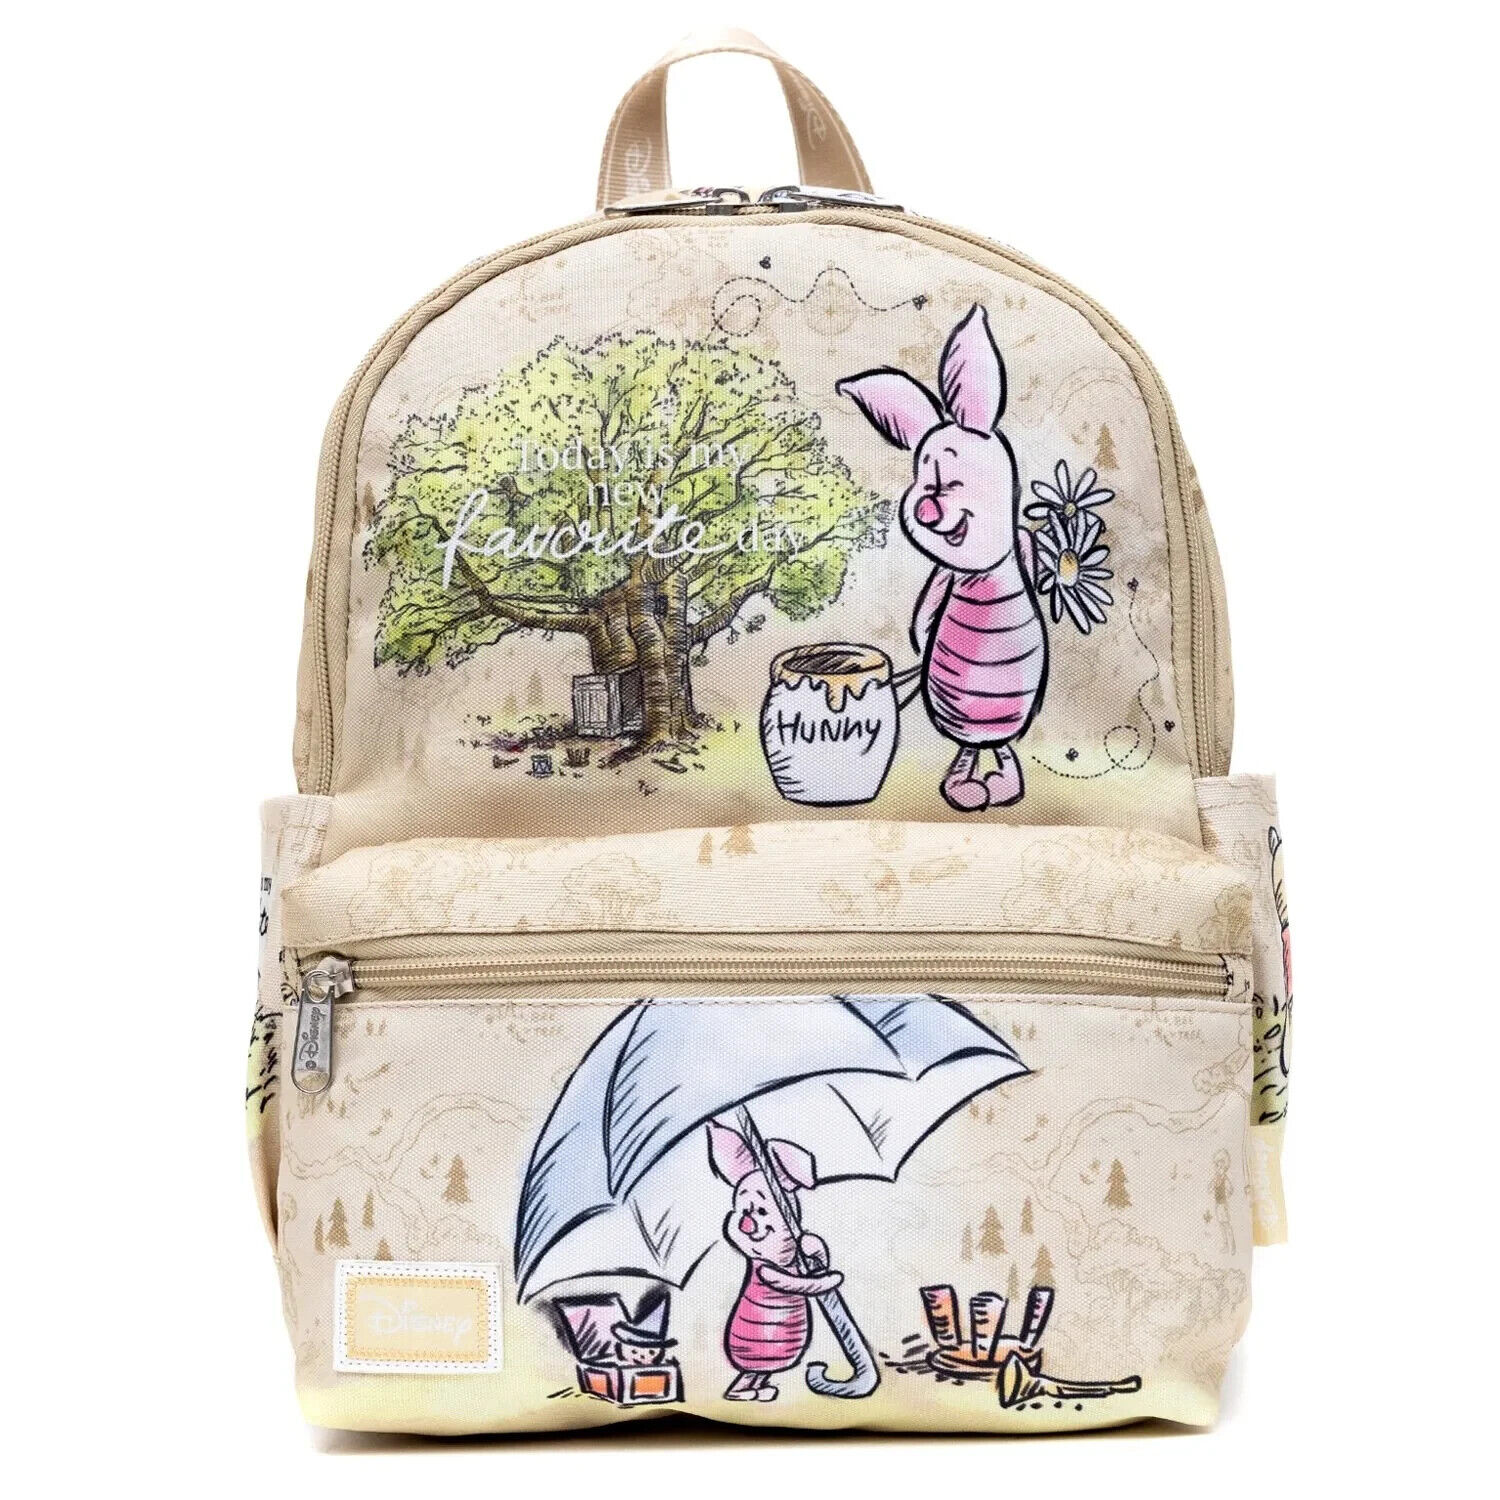 Disney Winnie the Pooh Piglet 13-inch Nylon Backpack Deluxe Allover Print